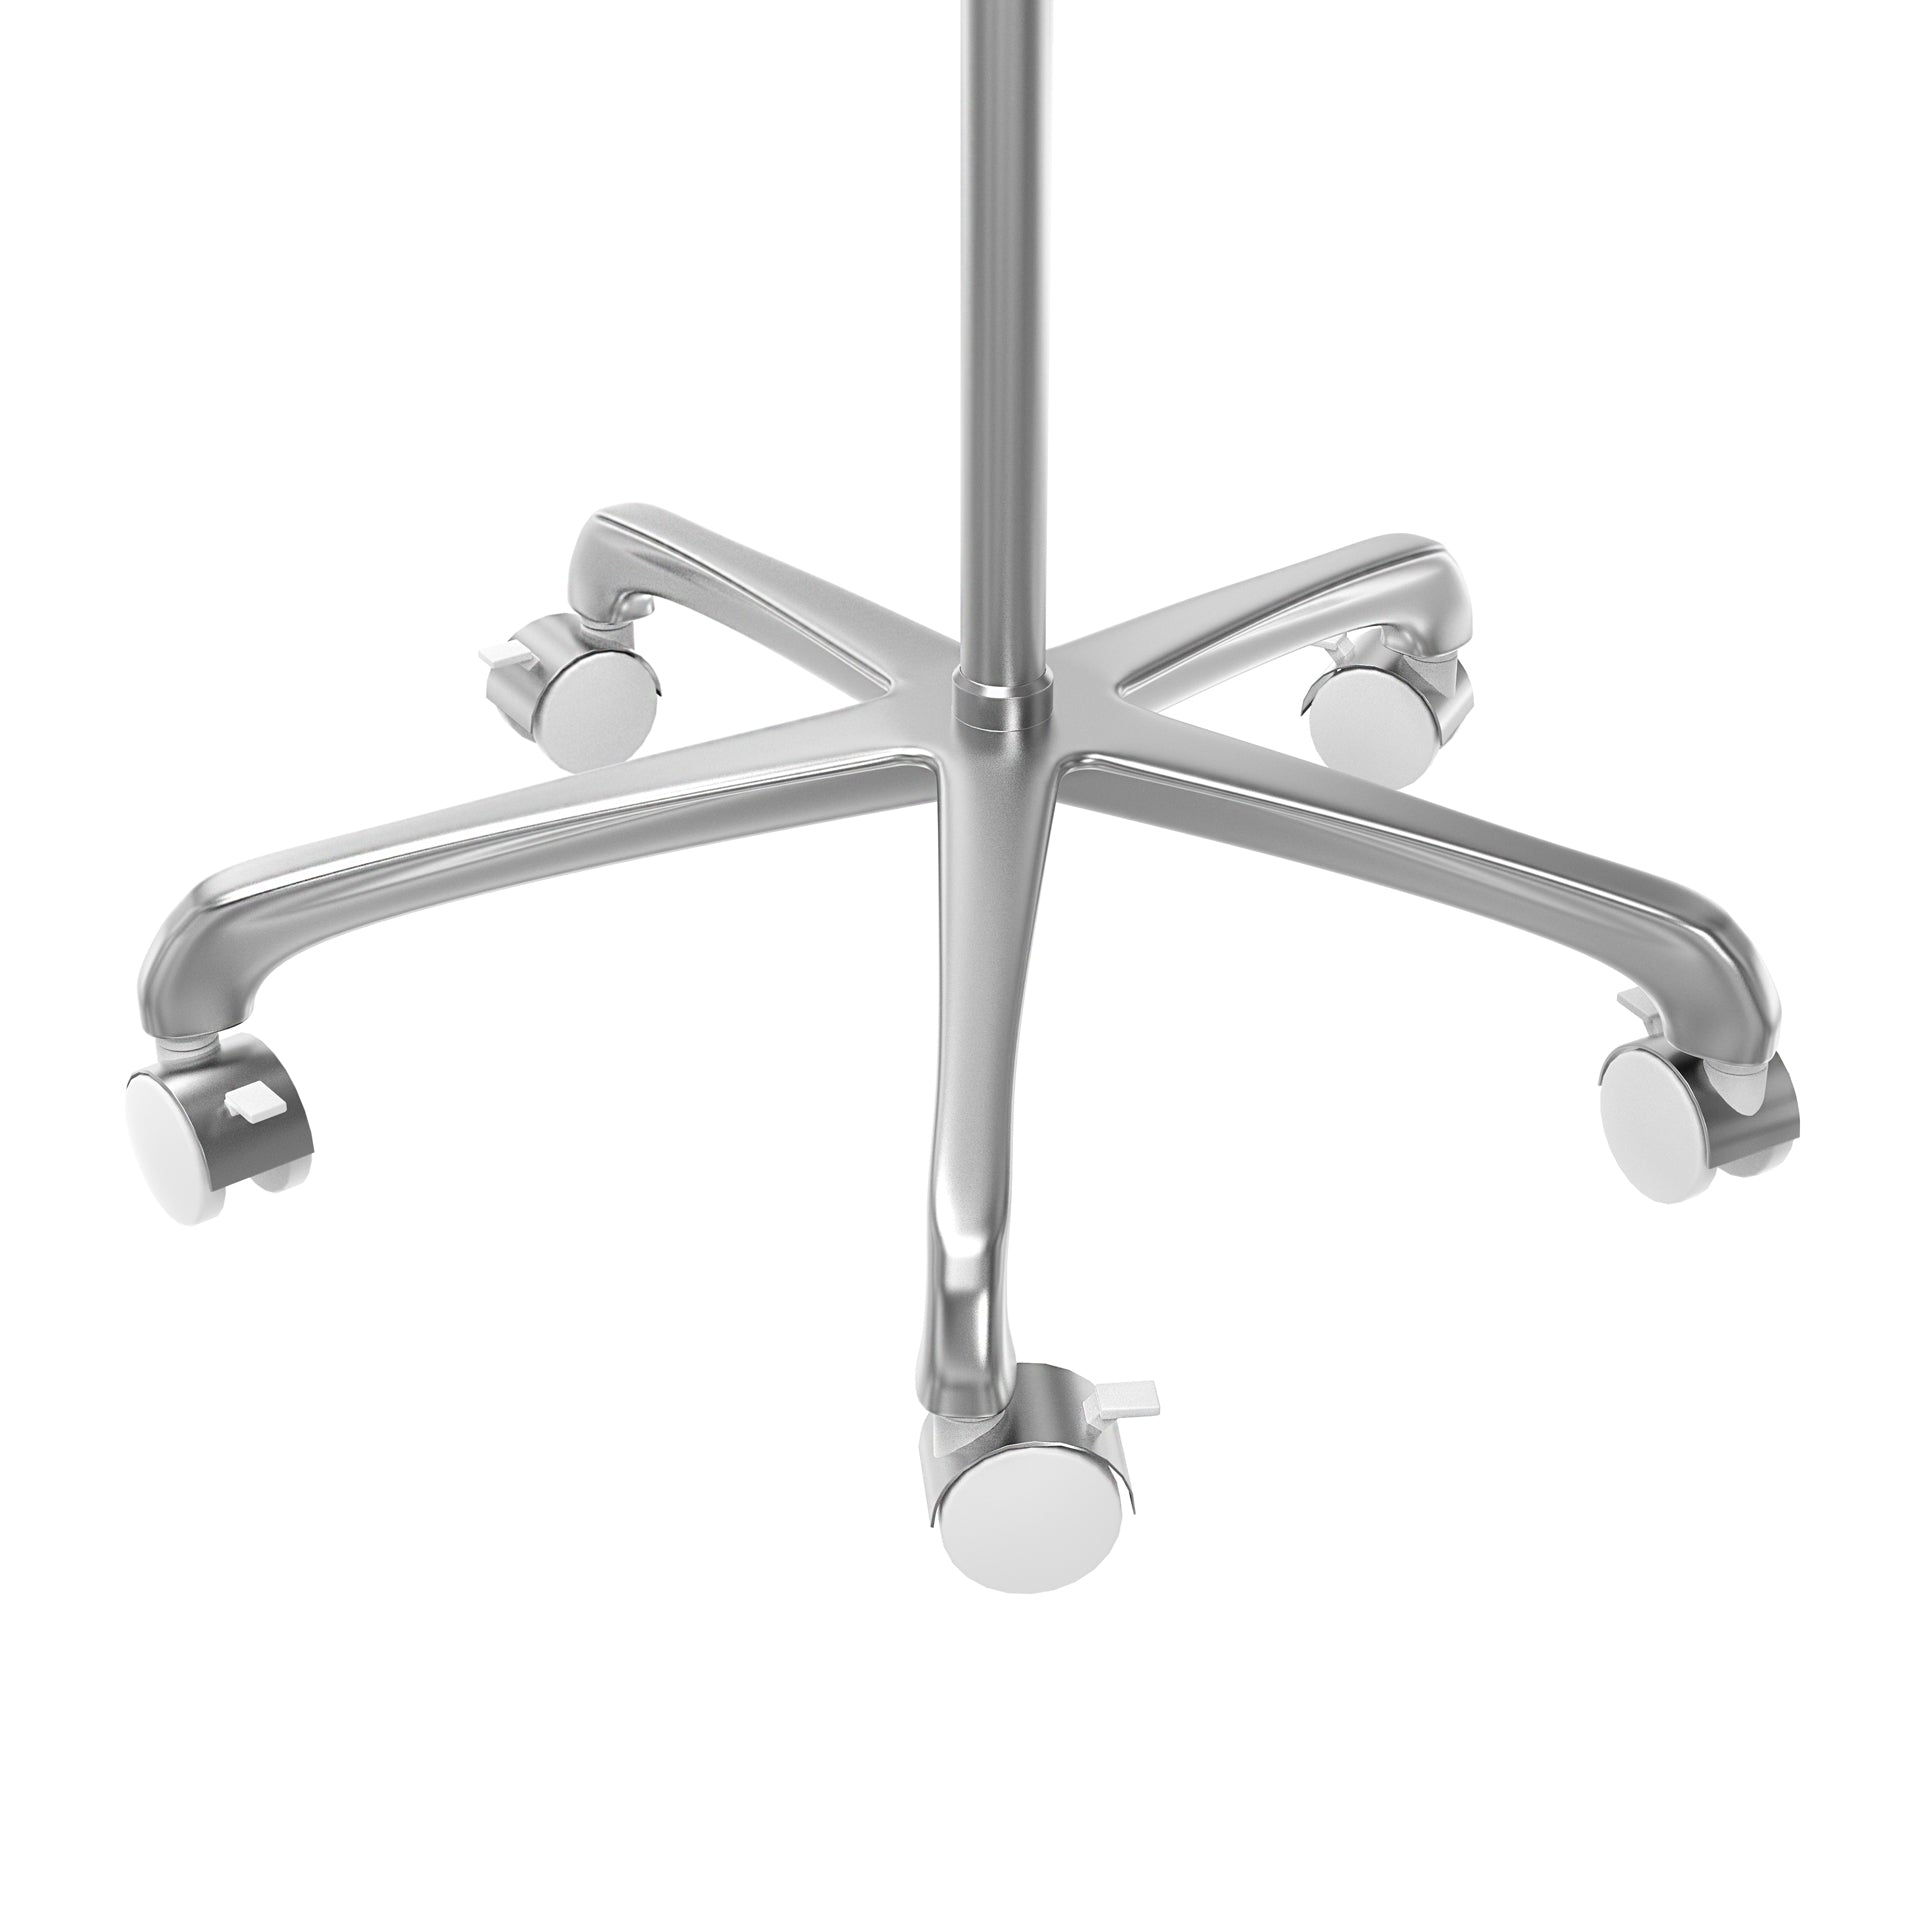 Height-Adjustable Floor Stand with Laptop Holder